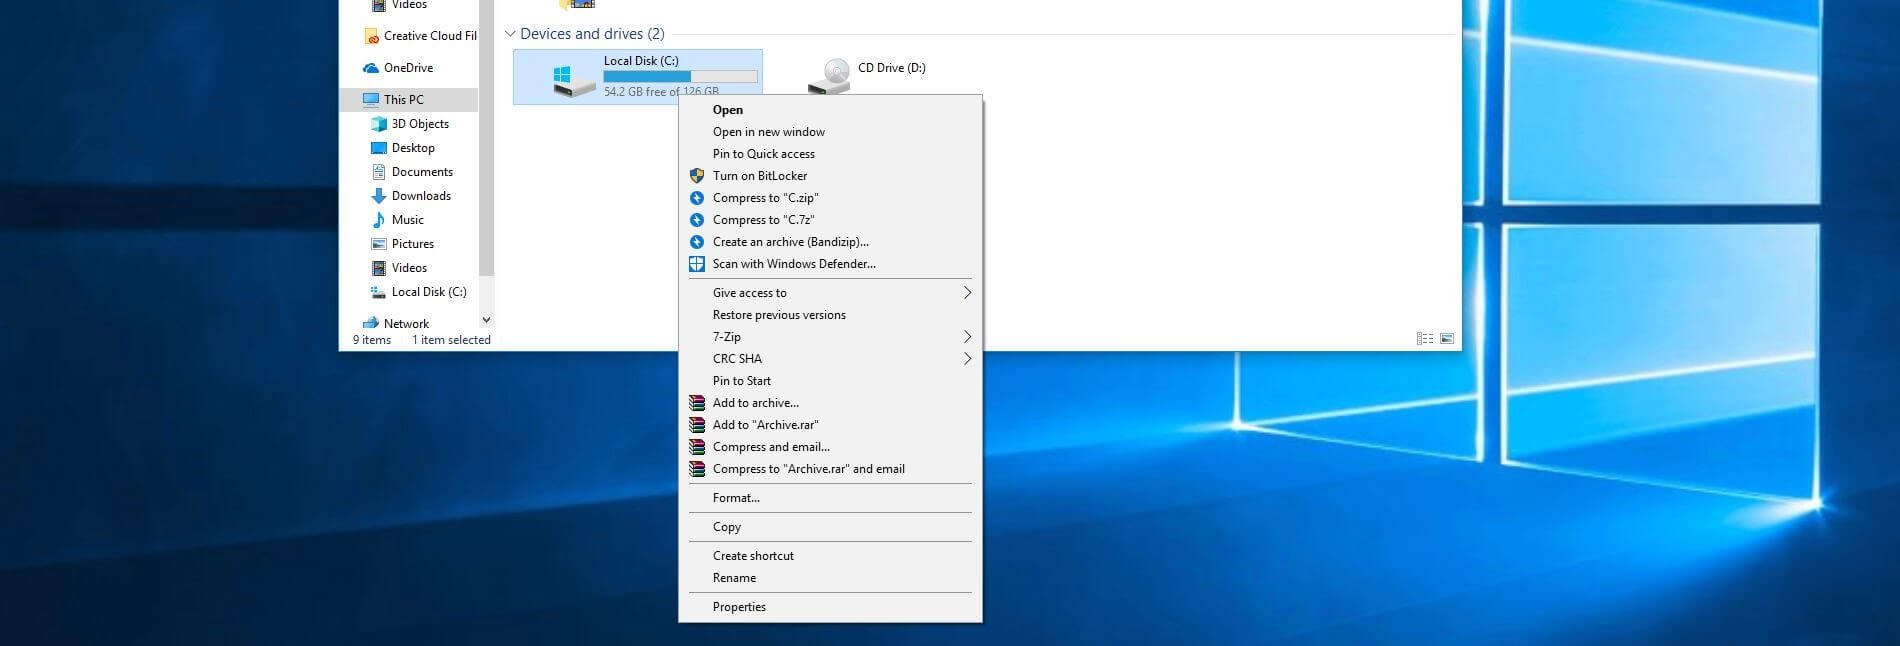 Devices and drives overview in Windows 10